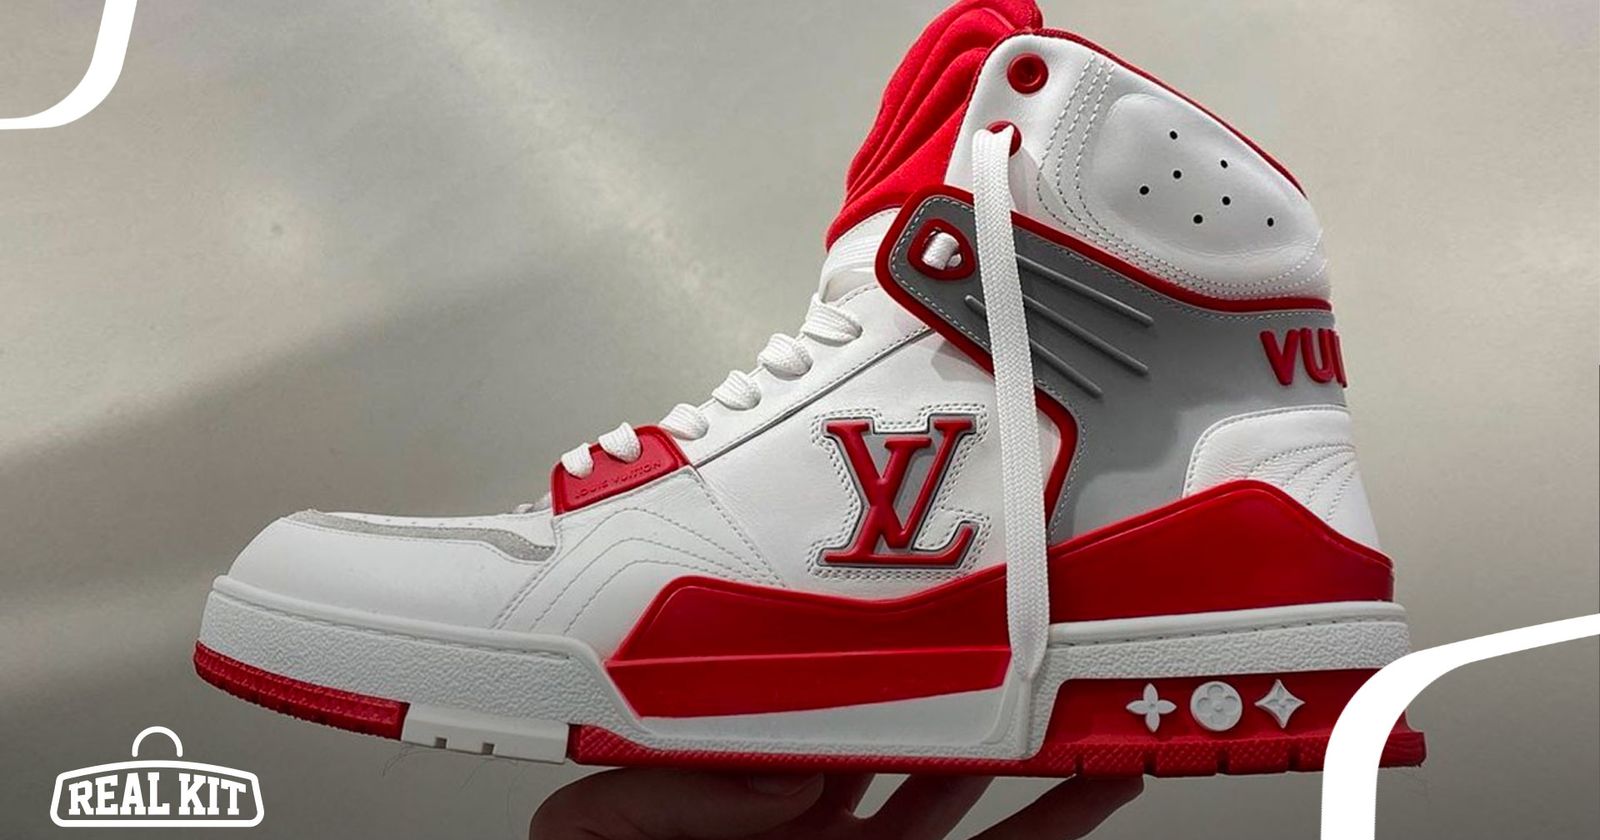 vuitton sneakers red and white